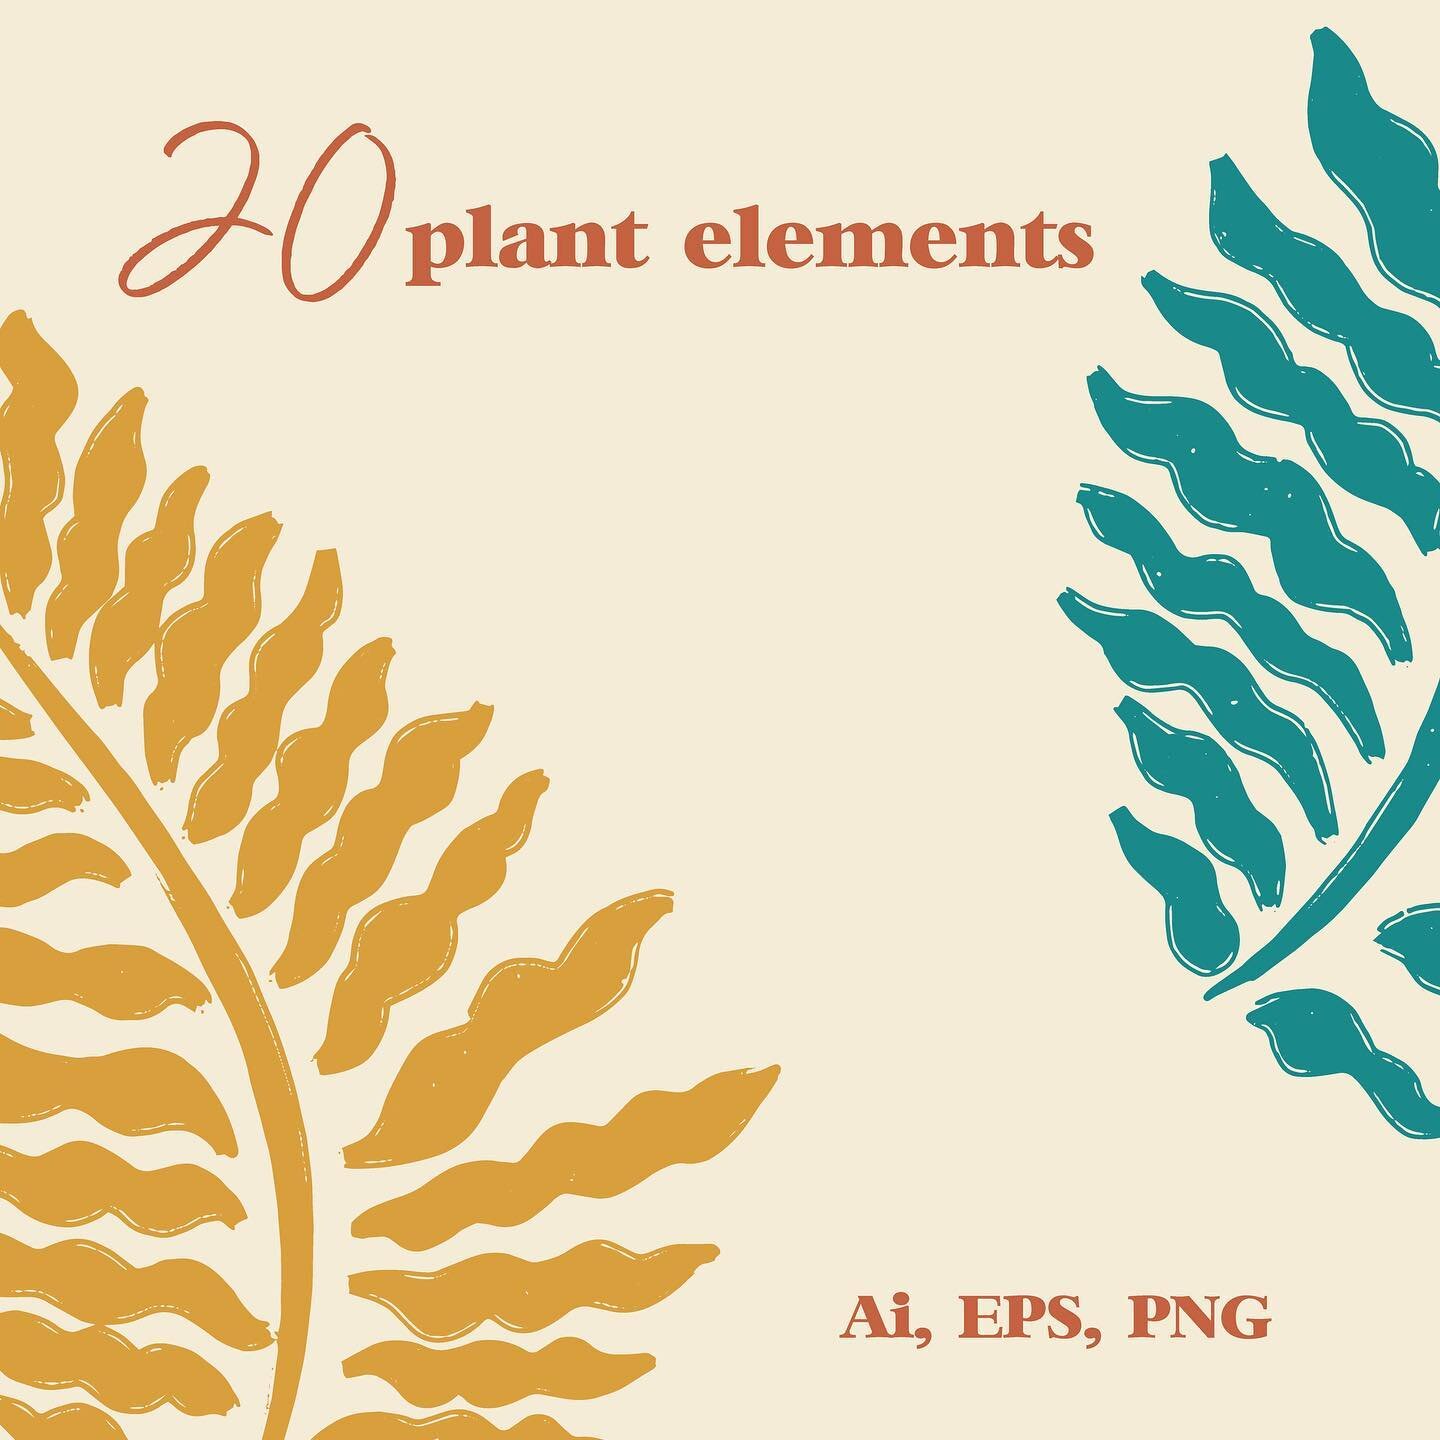 20 plant elements for you 🌱✨ I created these hand drawn textured elements for you to use in your own branding and marketing! You can get them in Ai, EPS an PNG format. Also you can easily change the colors in Adobe illustrator! It is available on my